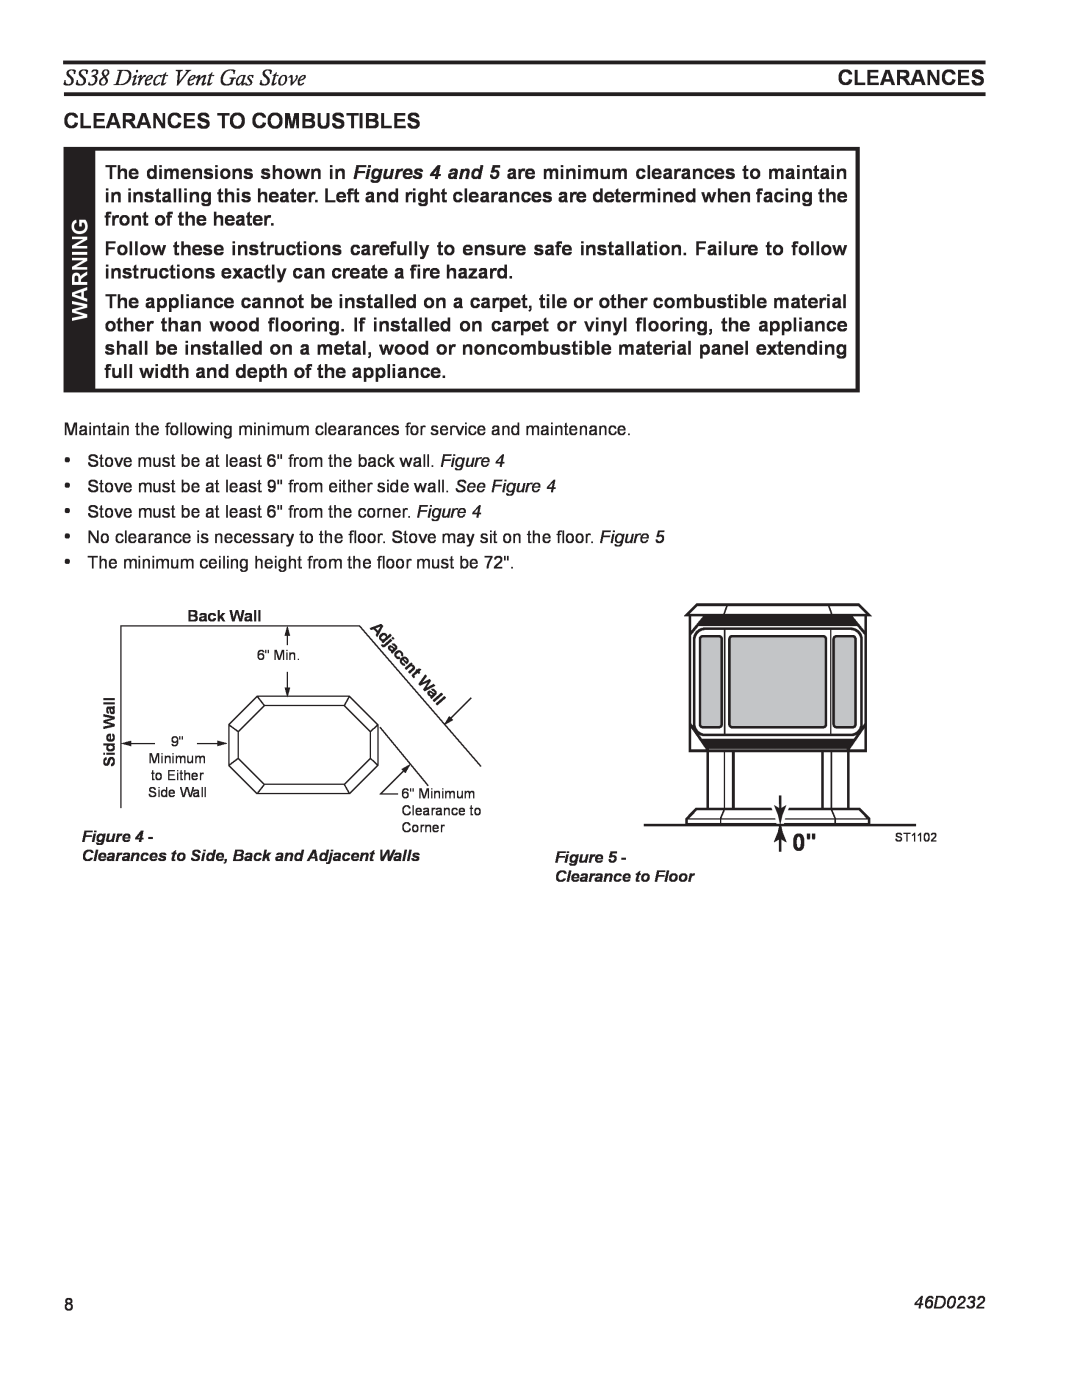 Monessen Hearth operating instructions clearances, Clearances to combustibles, SS38 Direct Vent Gas Stove 